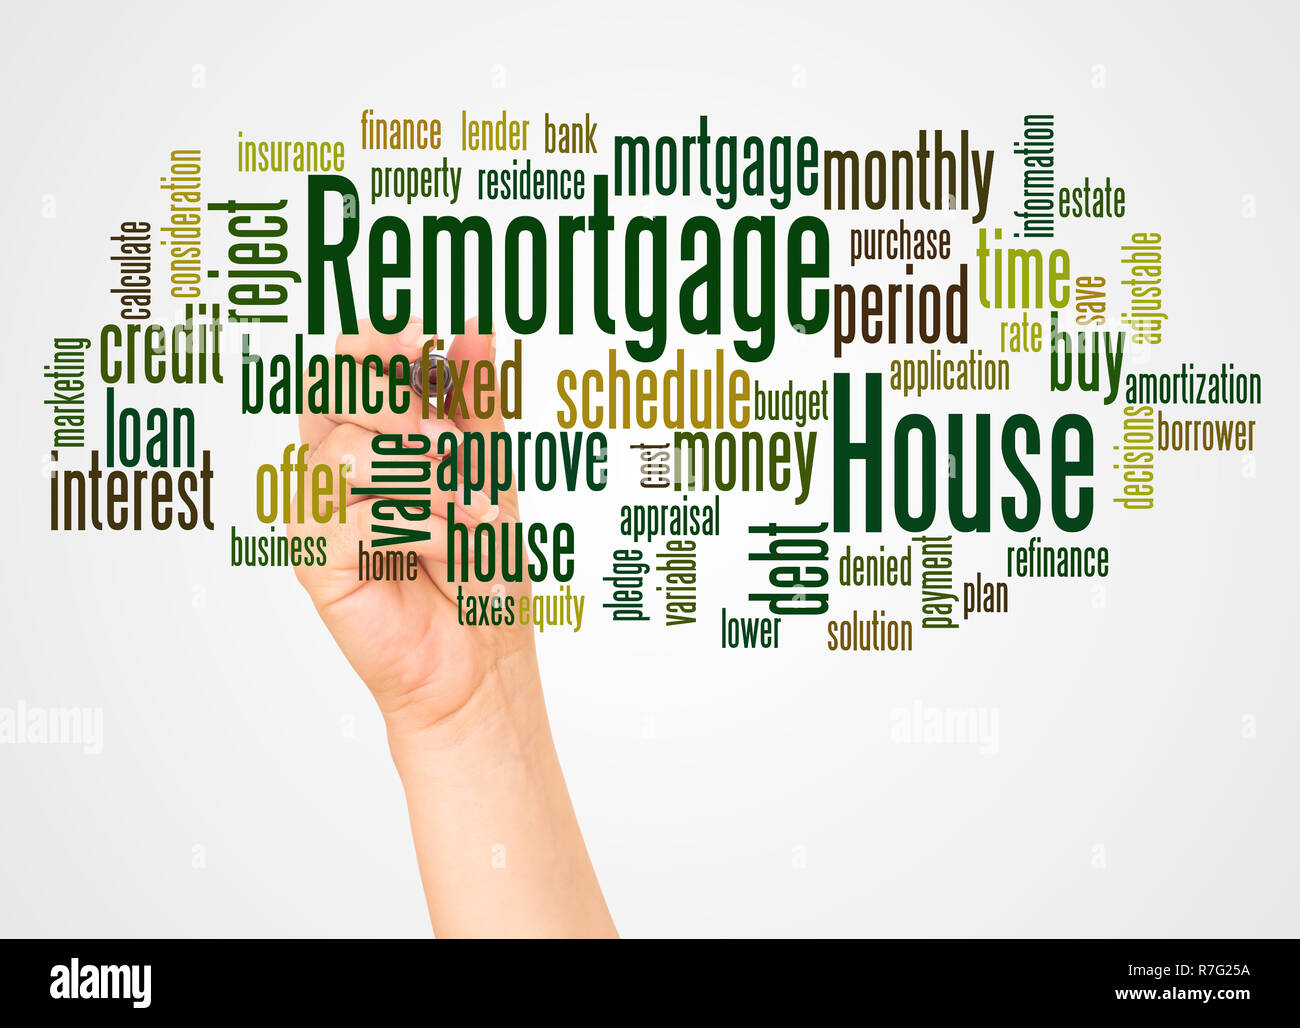 House Remortgage word cloud and hand with marker concept on white background. Stock Photo